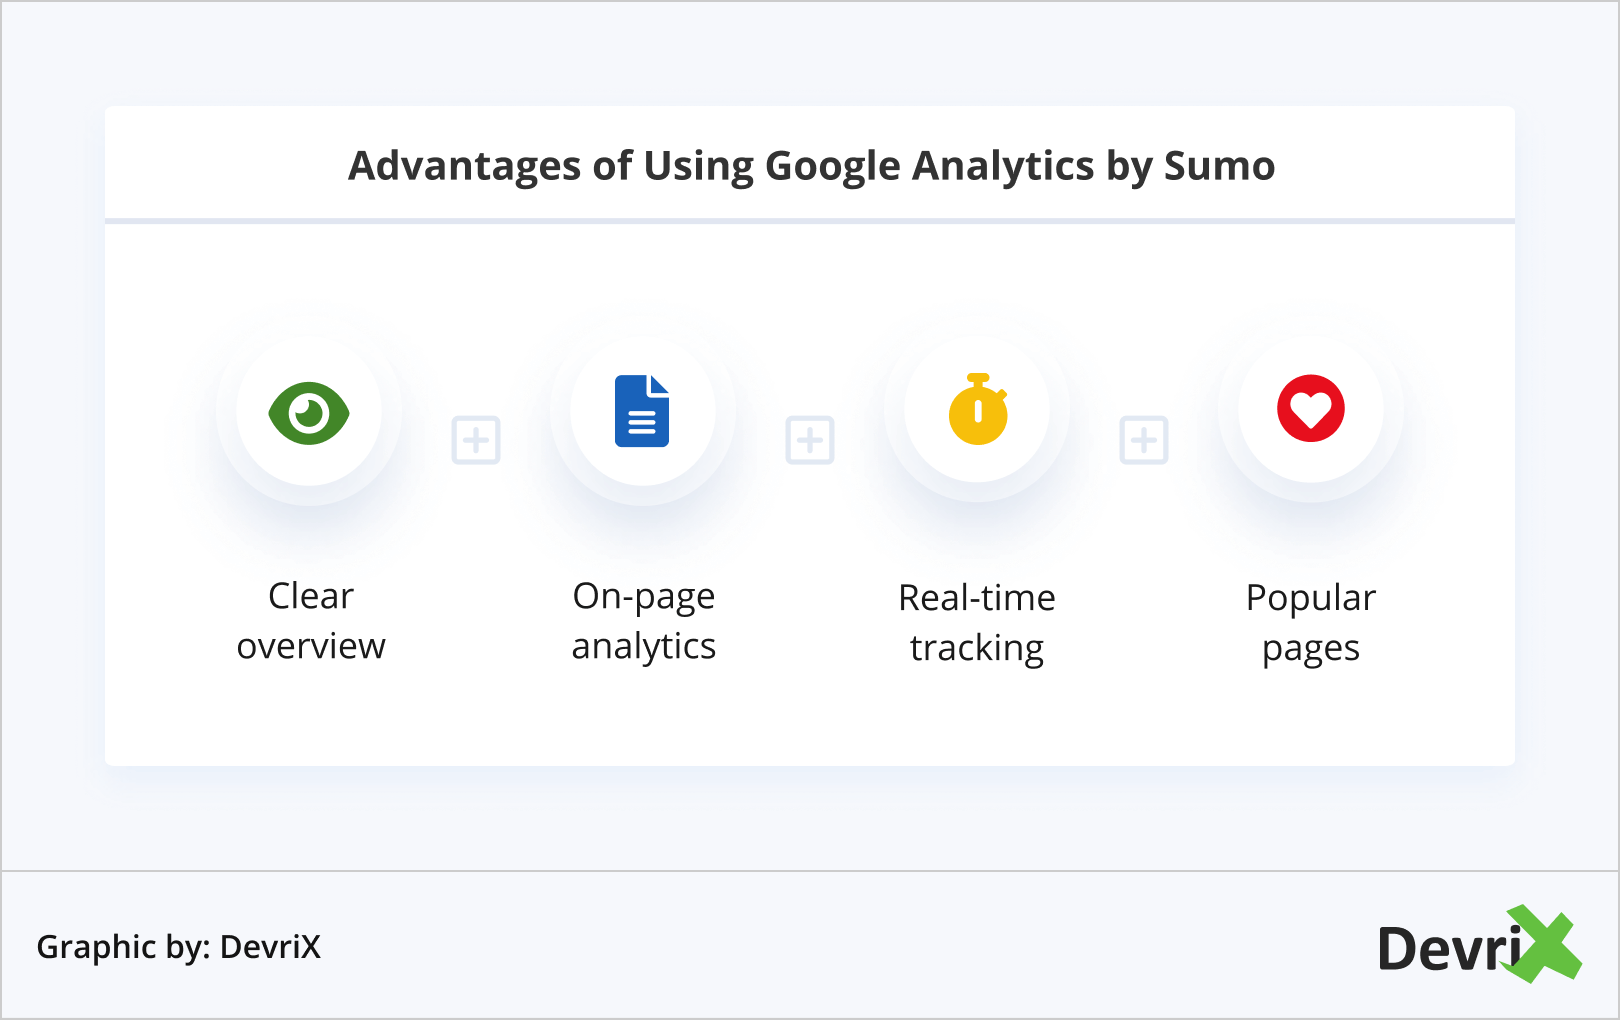 Advantages of Using Google Analytics by Sumo